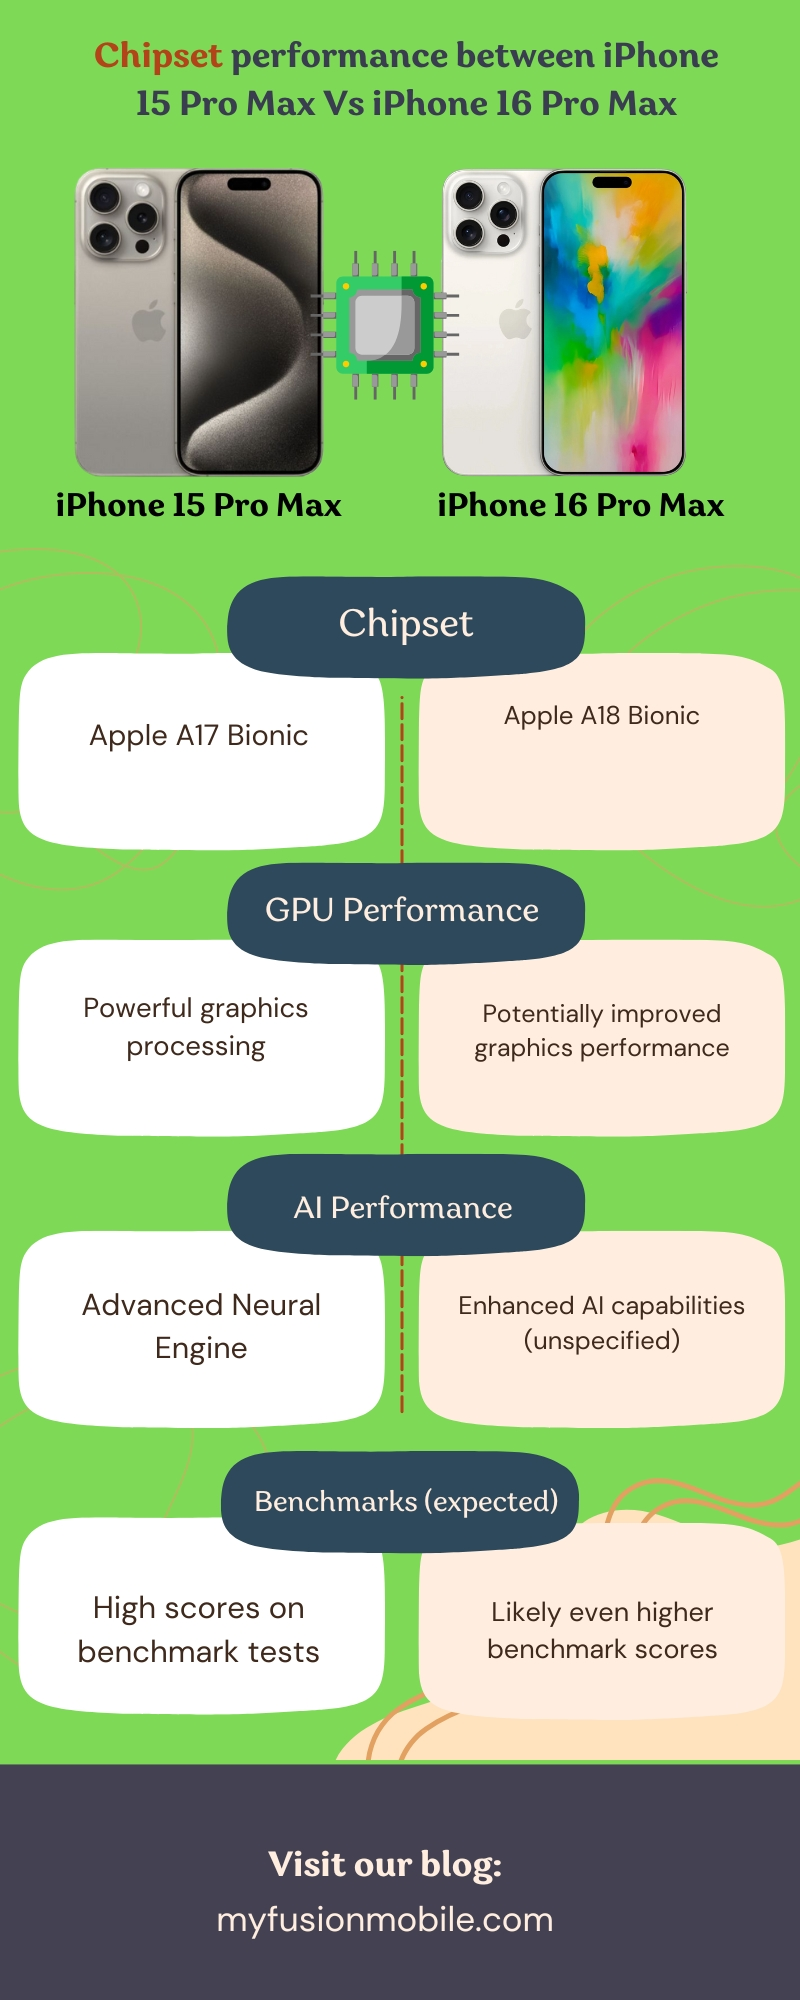 Chipset performance between iPhone 15 Pro Max Vs iPhone 16 Pro Max